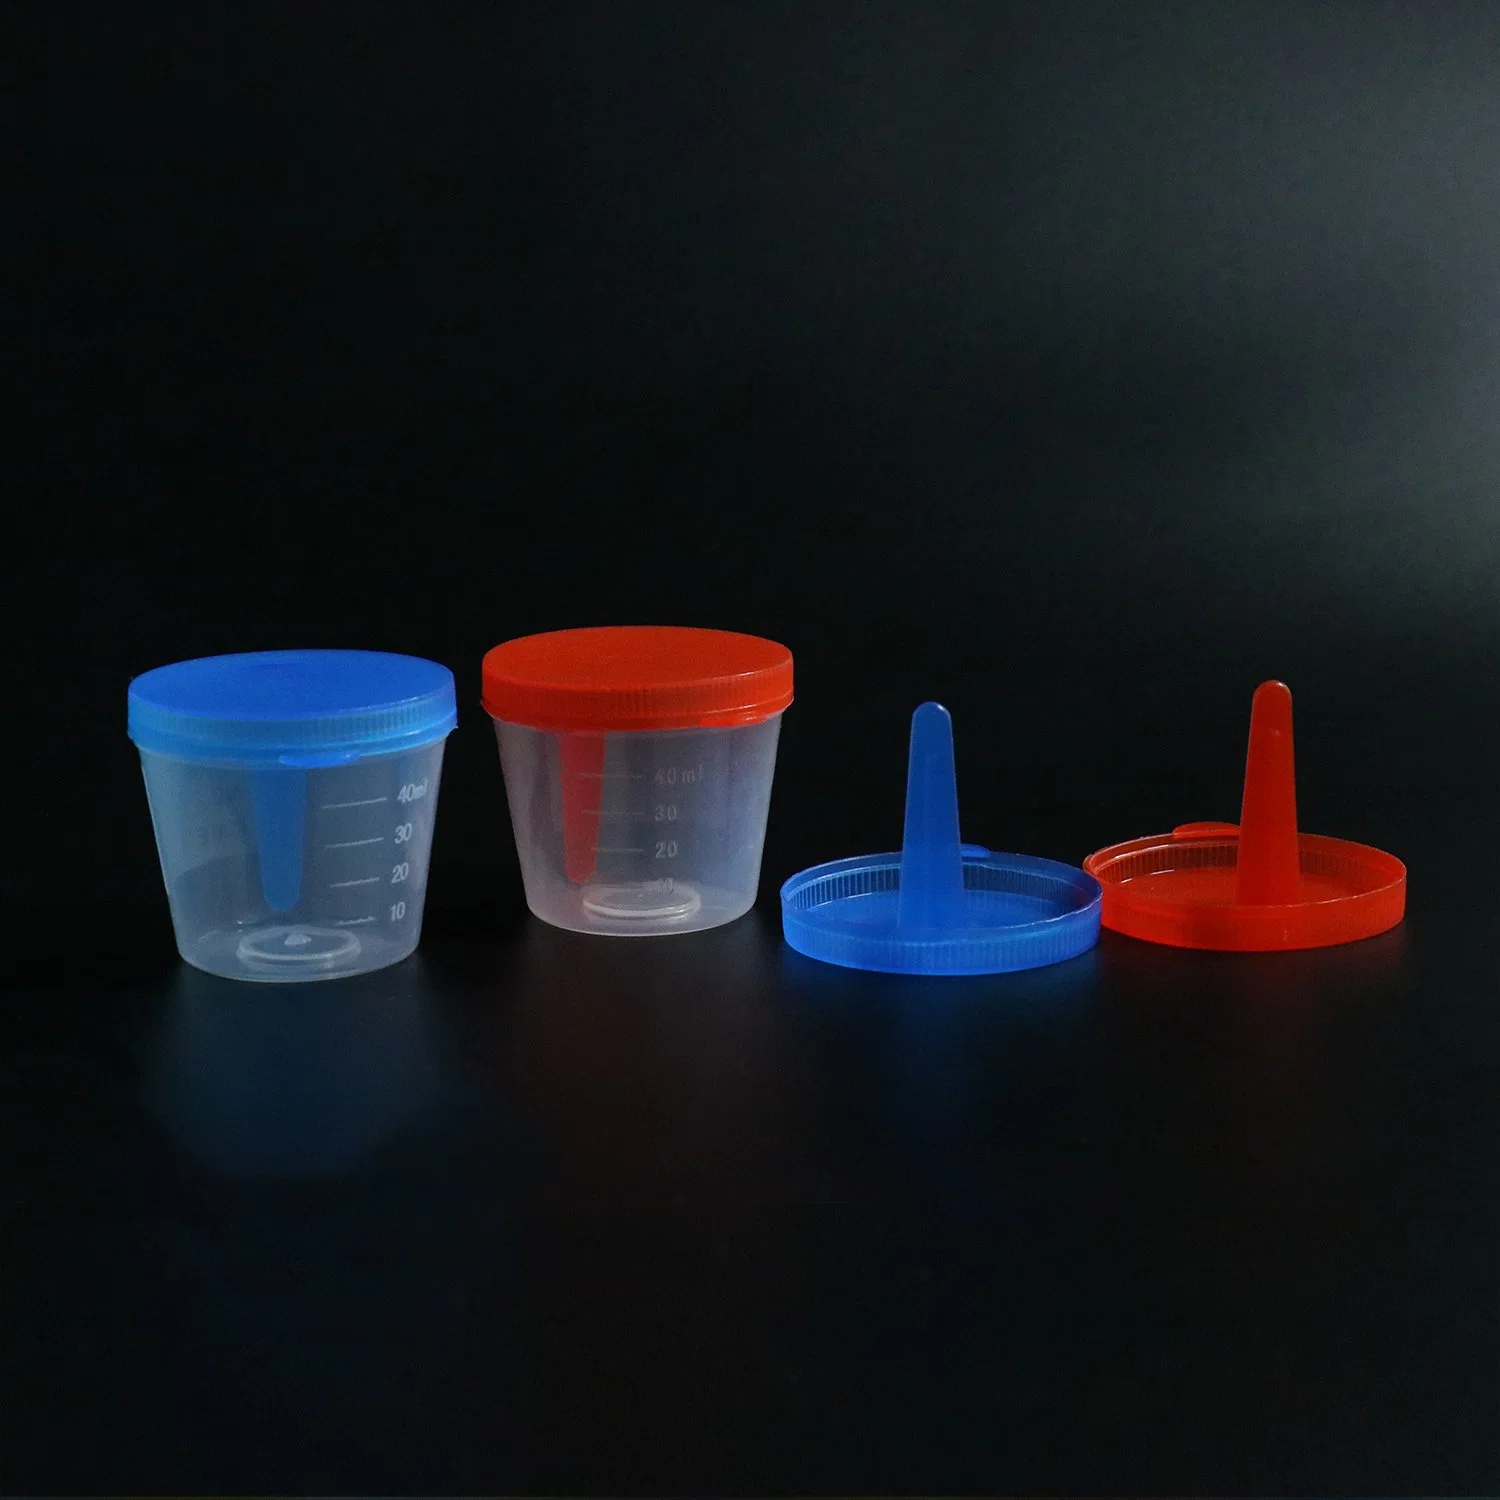 Siny 30ml 100ml Sterile Medical Products Sample Collection Urine Cup Container